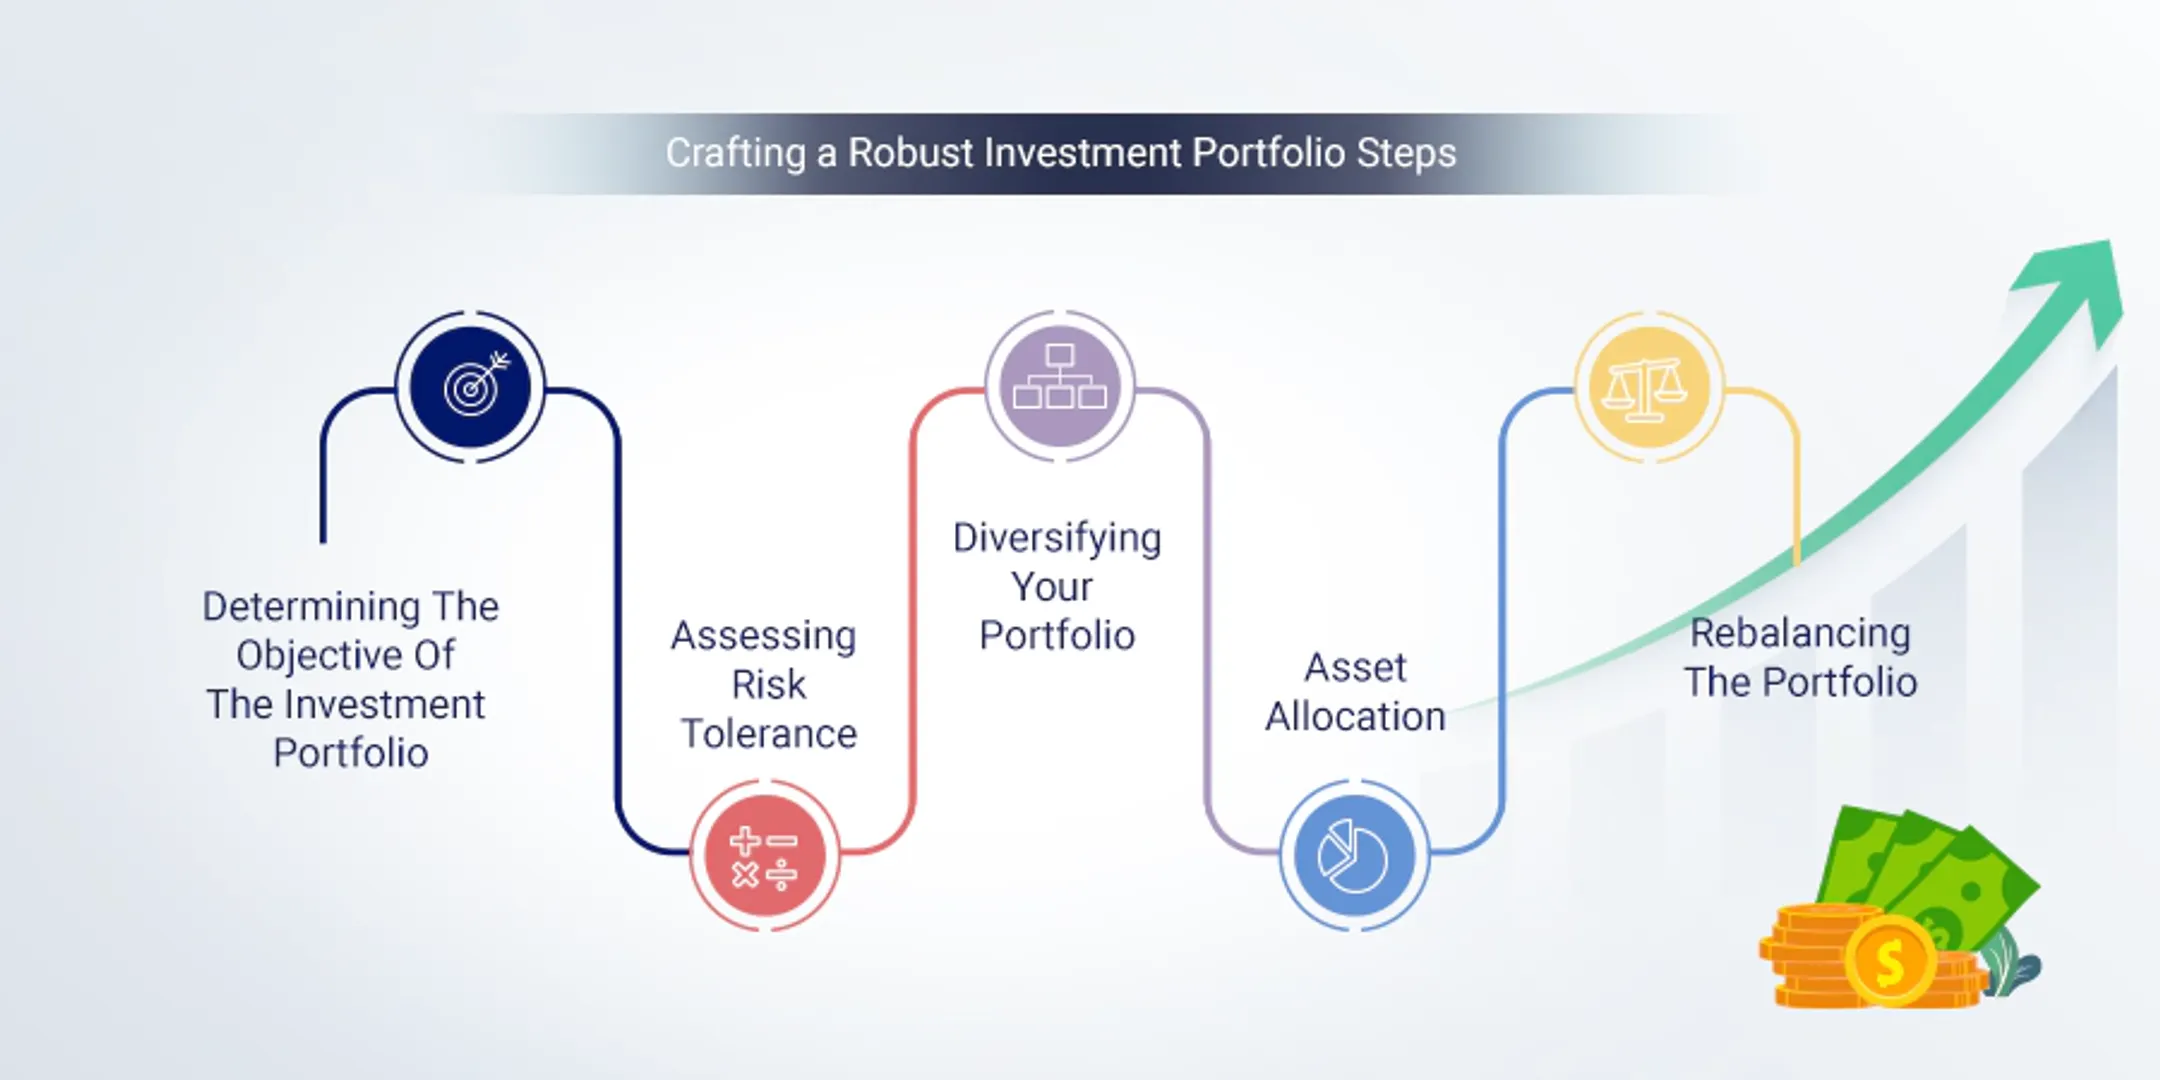 How to build an Investment Portfolio